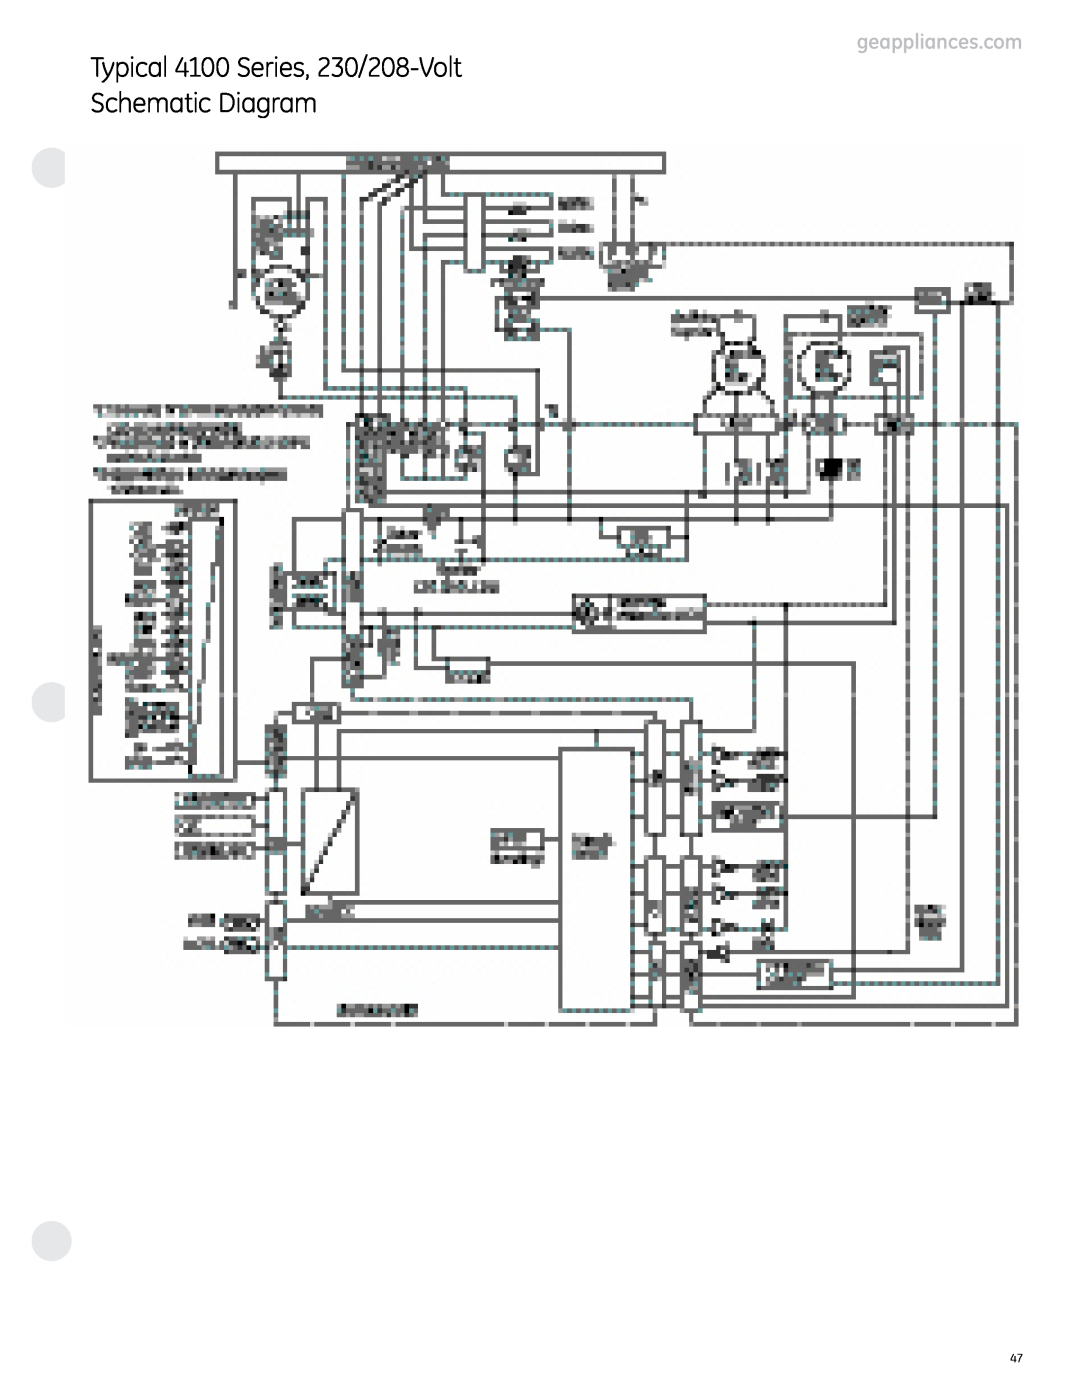 GE 6100 manual Typical 4100 Series, 230/208-Volt, Schematic Diagram 